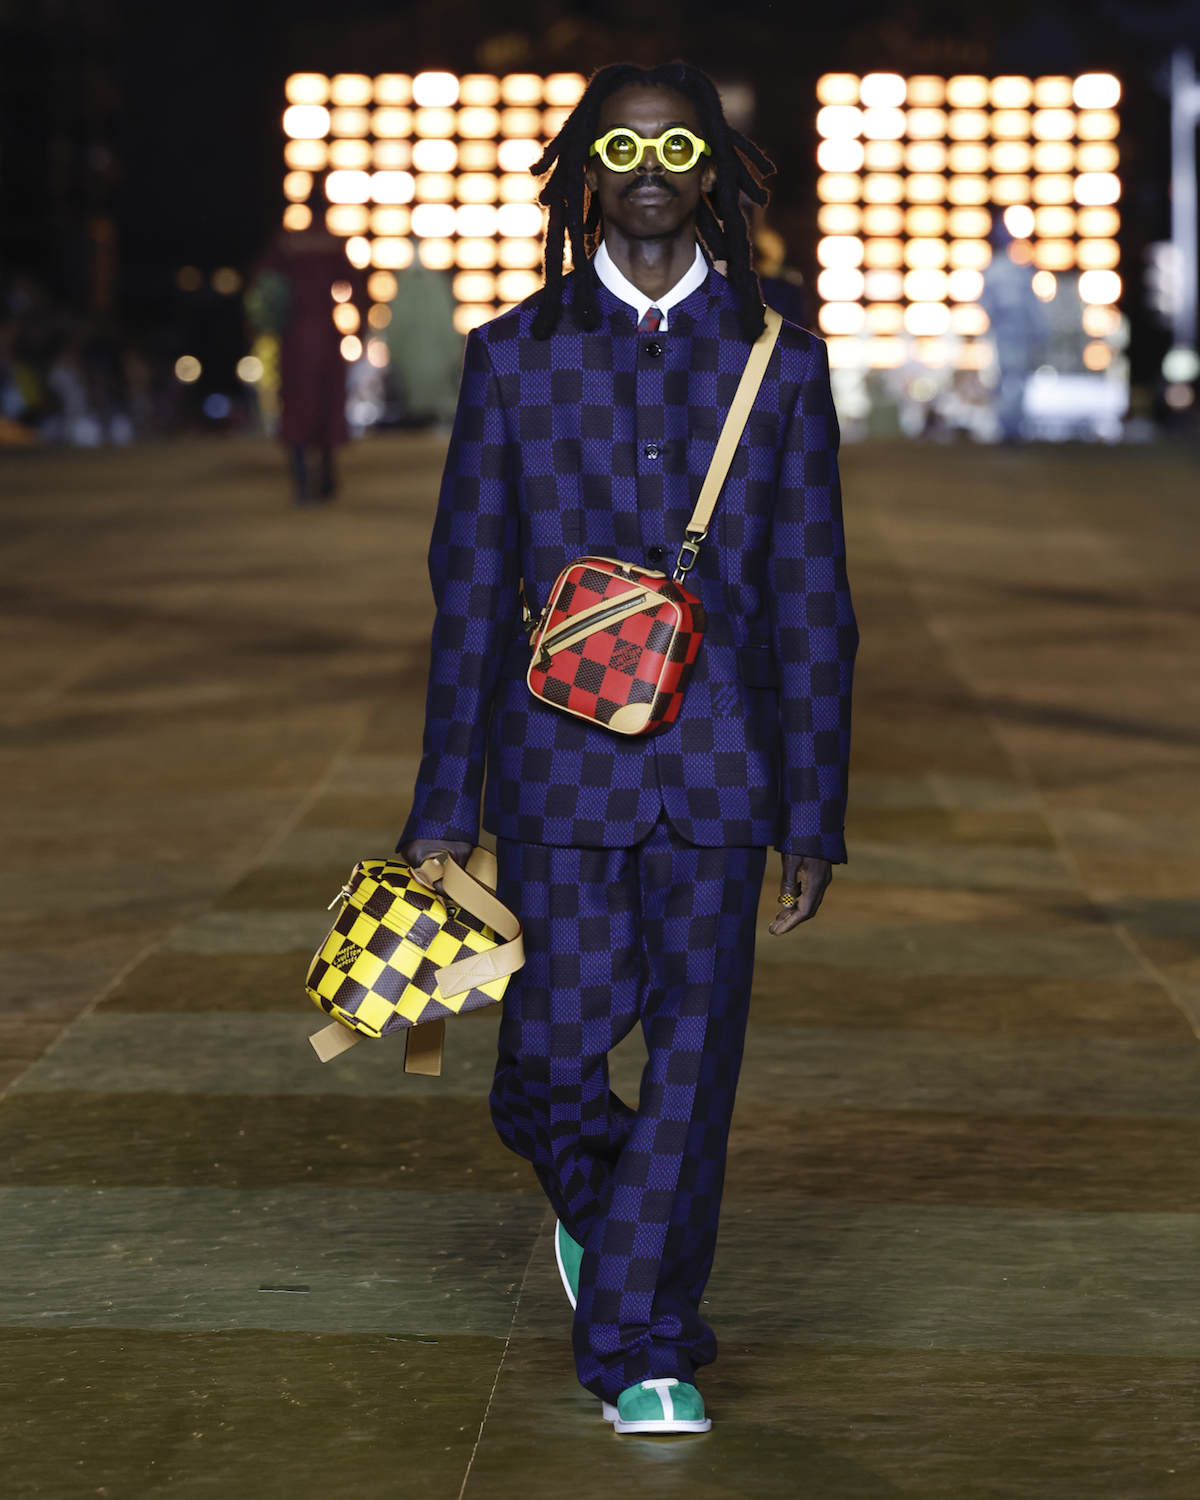 Word on the Street: Document solicits the public's opinion on KidSuper's  Louis Vuitton debut